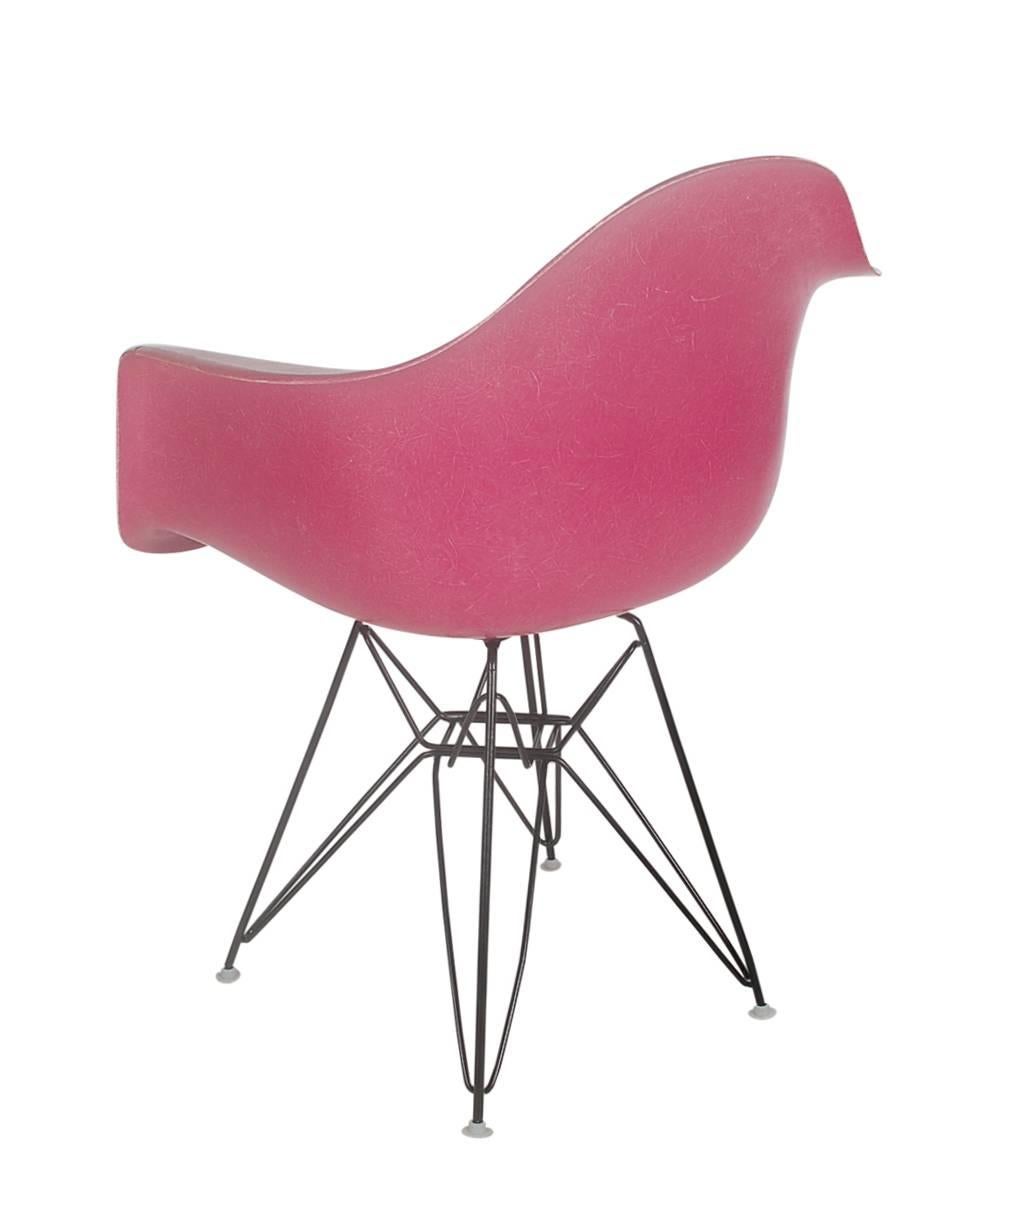 Mid-Century Modern Set of Four Hot Pink Fiberglass Chairs by Charles Eames for Herman Miller